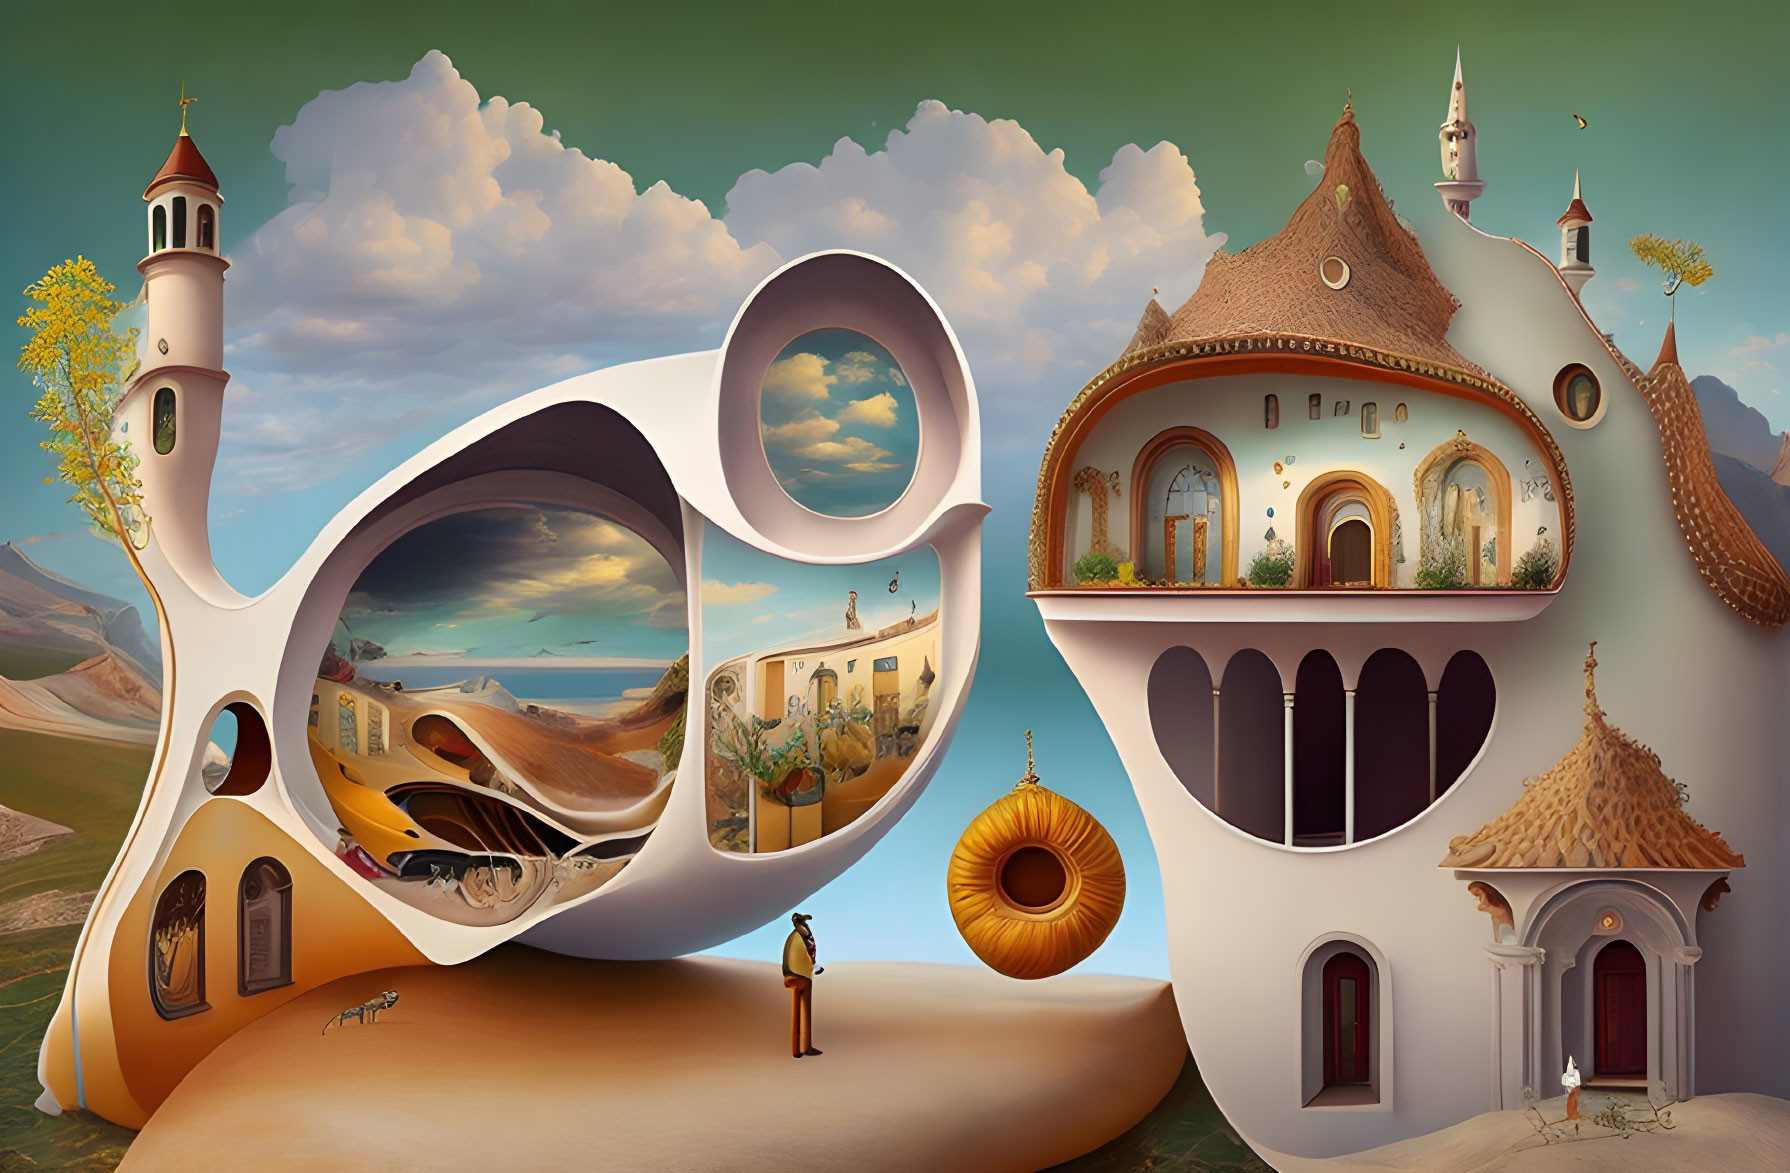 Surreal landscape with person and fantastical buildings blending traditional and abstract shapes.